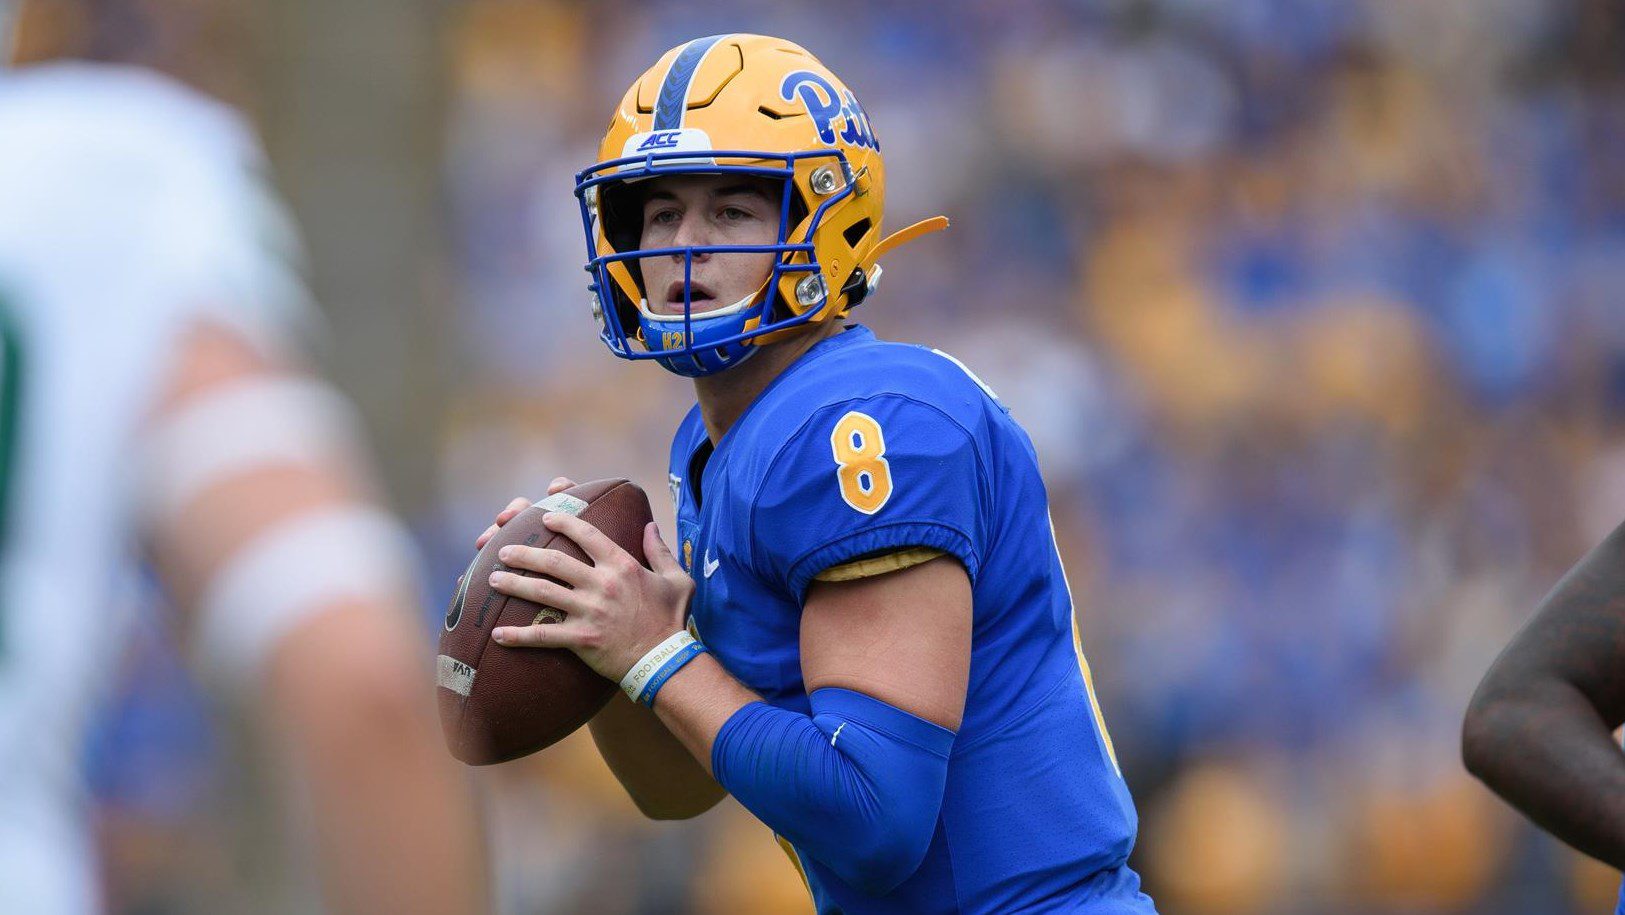 University of Pittsburgh QB Kenny Pickett is an underrated Draft Prospect